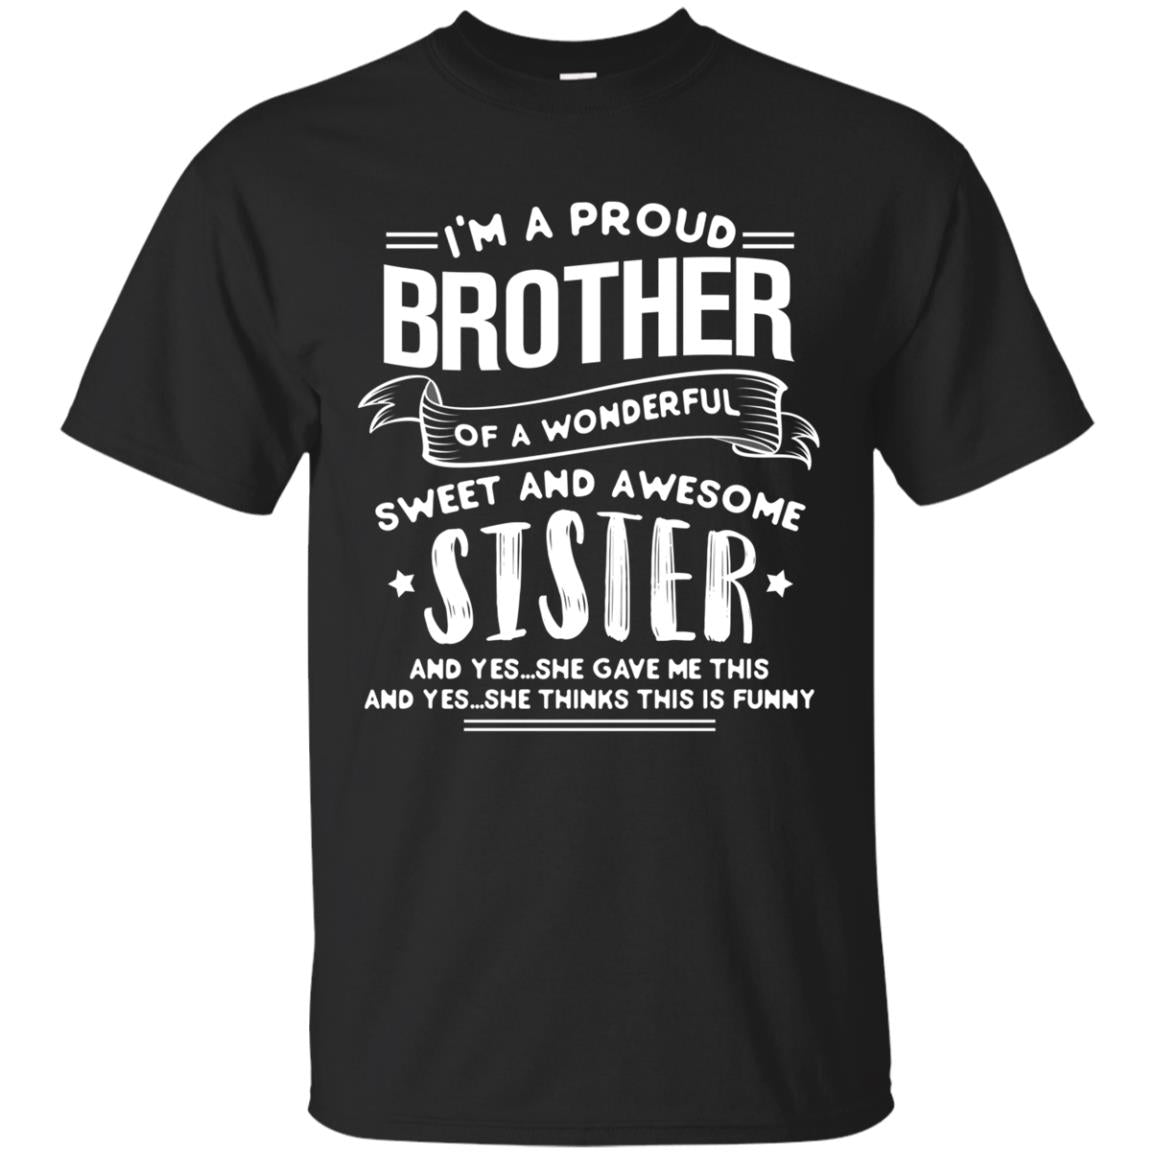 I_m A Proud Brother Of A Wonderful, Sweet And Awesome Sister Family ShirtG200 Gildan Ultra Cotton T-Shirt